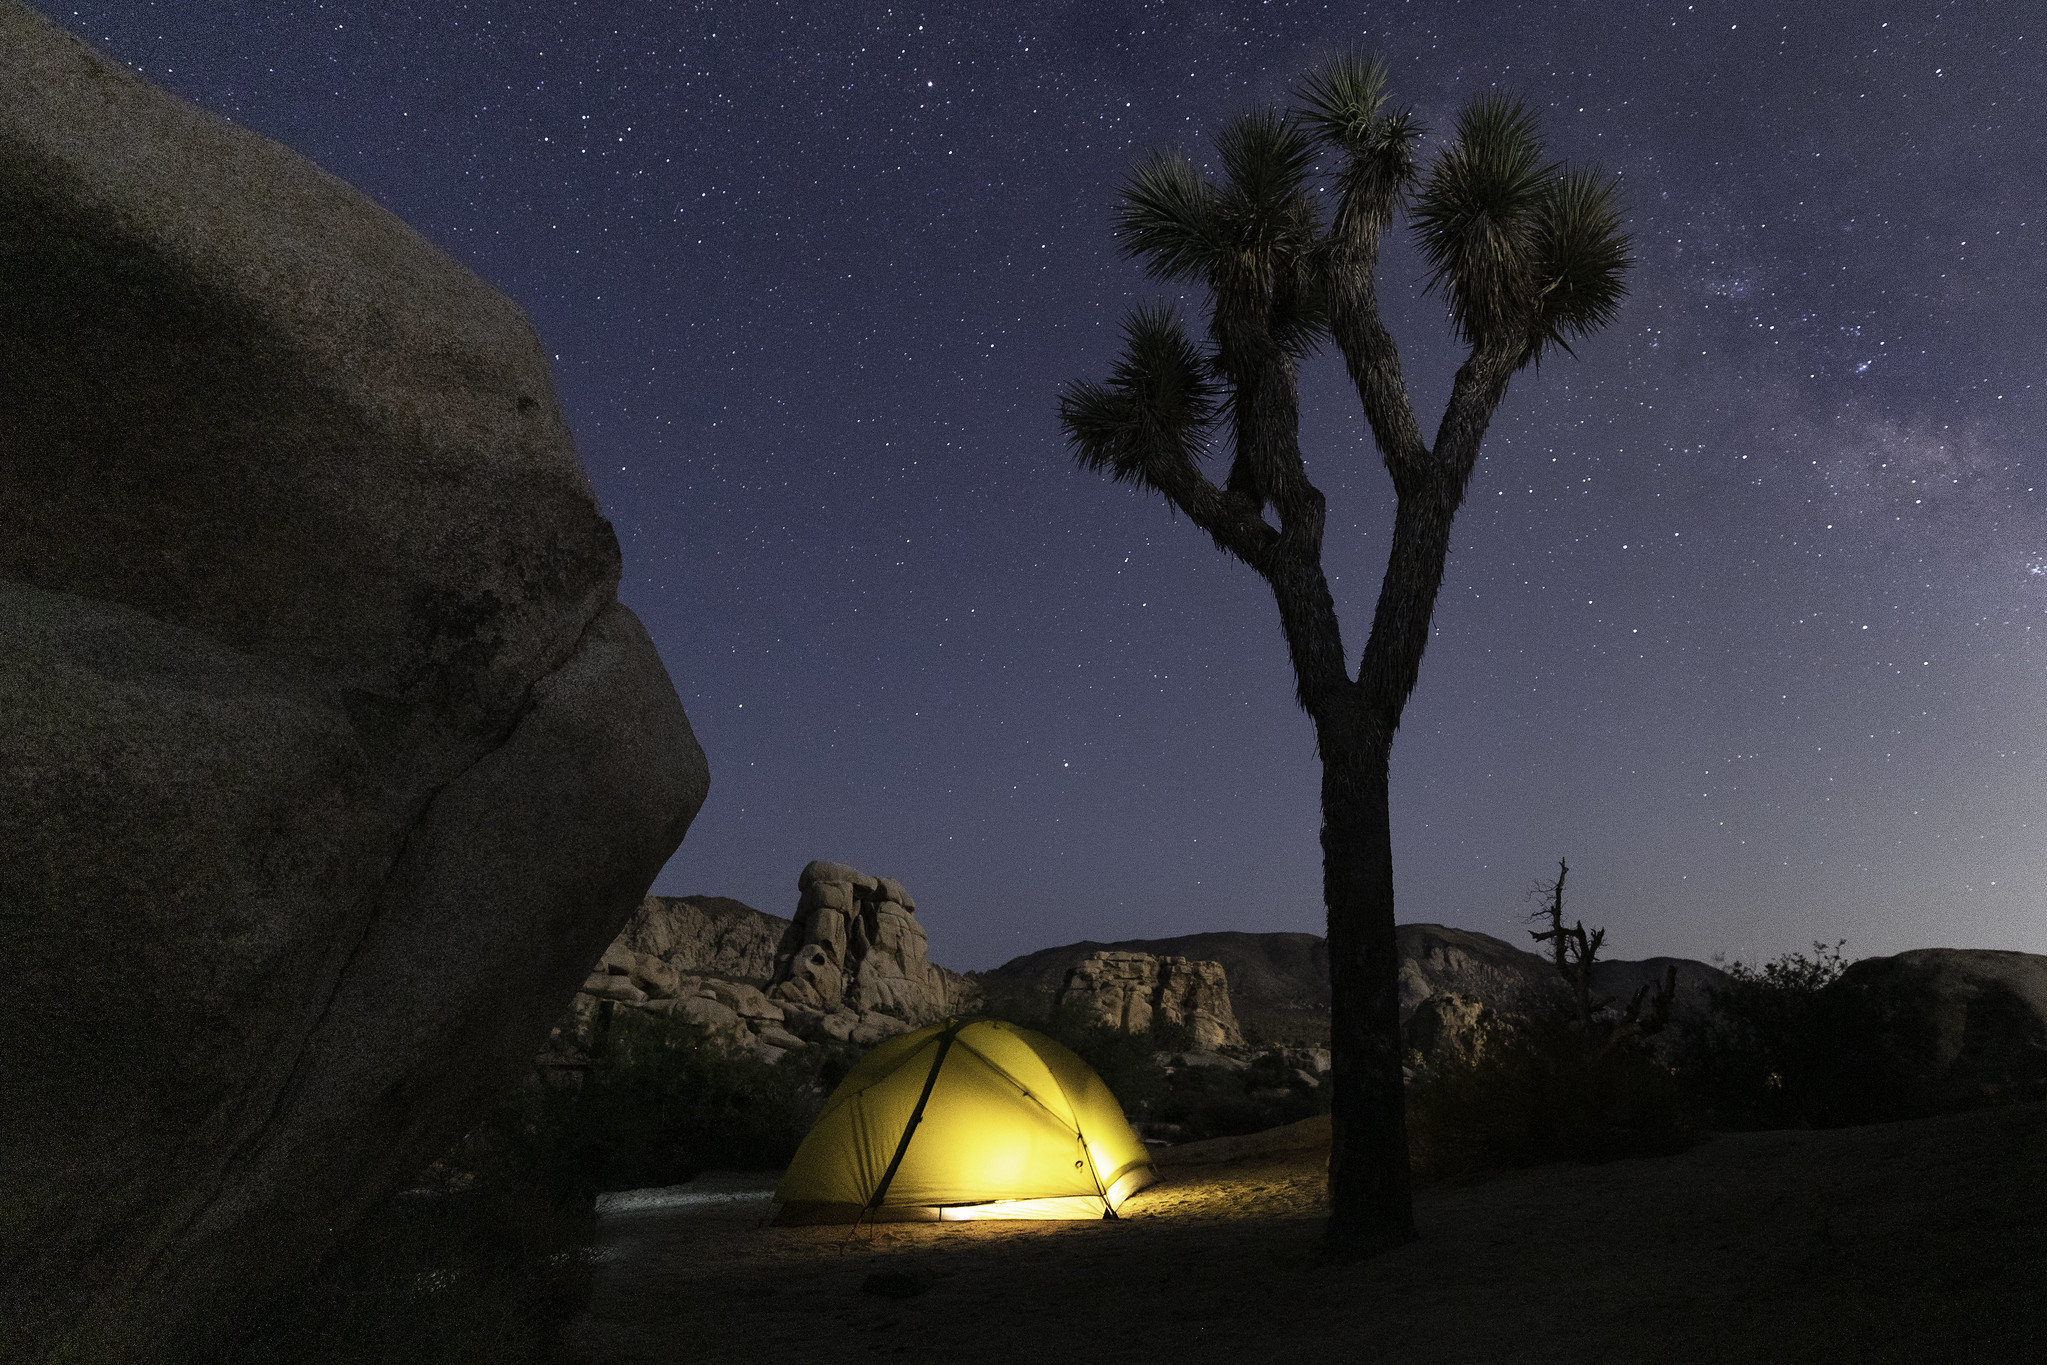 a tent and Joshua tree in a campsite under the stars.